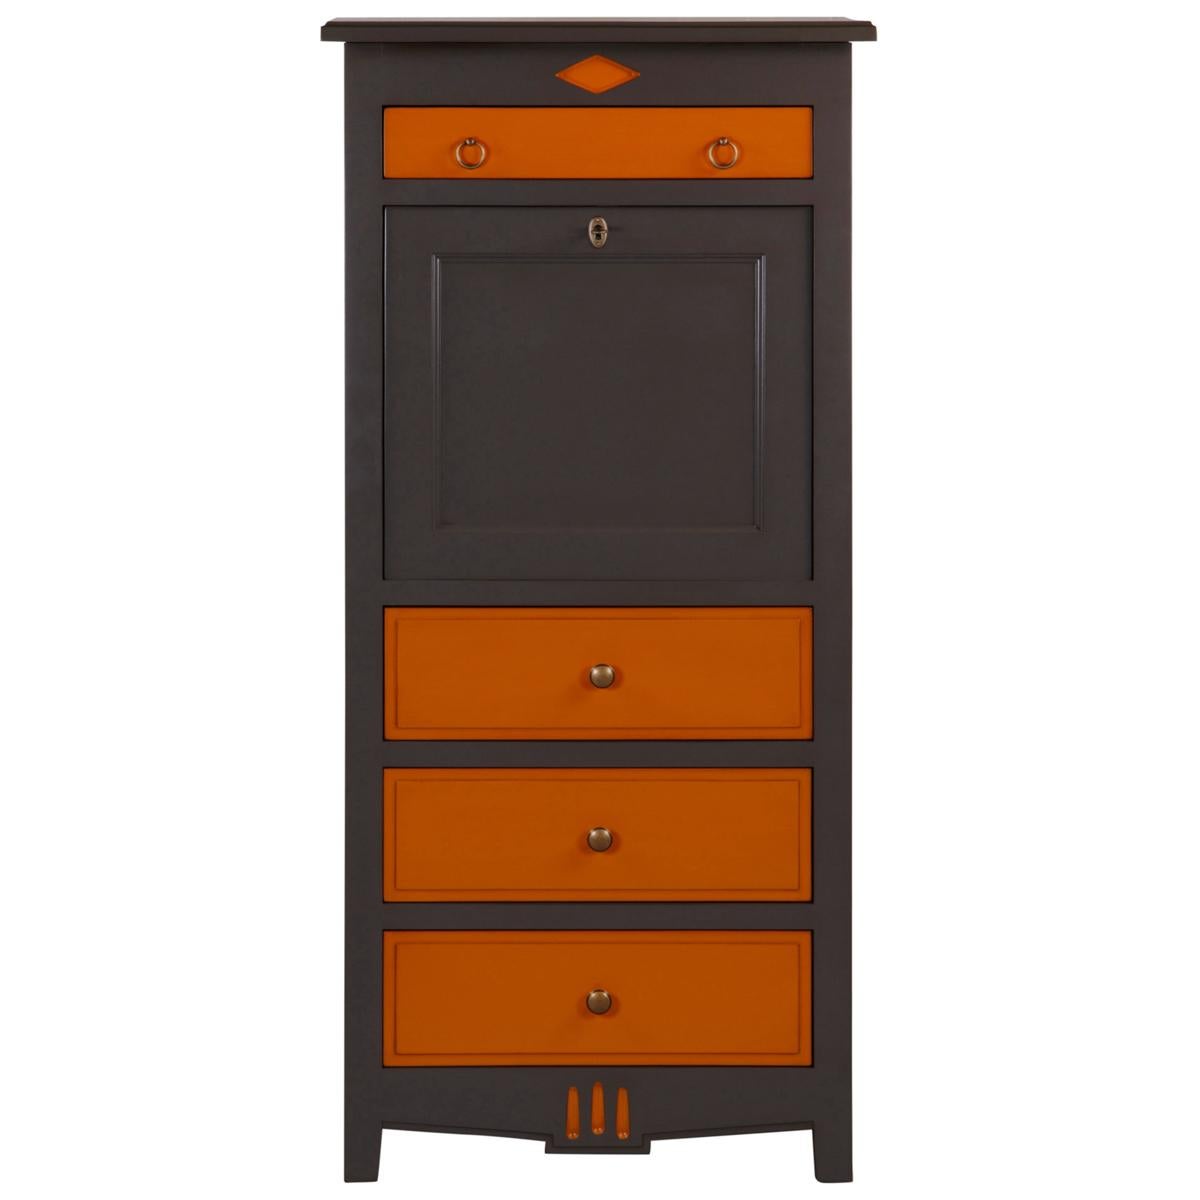 This Secretary is a handmade modernized interpretation of the French Directoire style at the end of the 18th century. This period design is remarkable with its straight, classical and timeless lines.

It is made of French Solid Cherry wood. Its